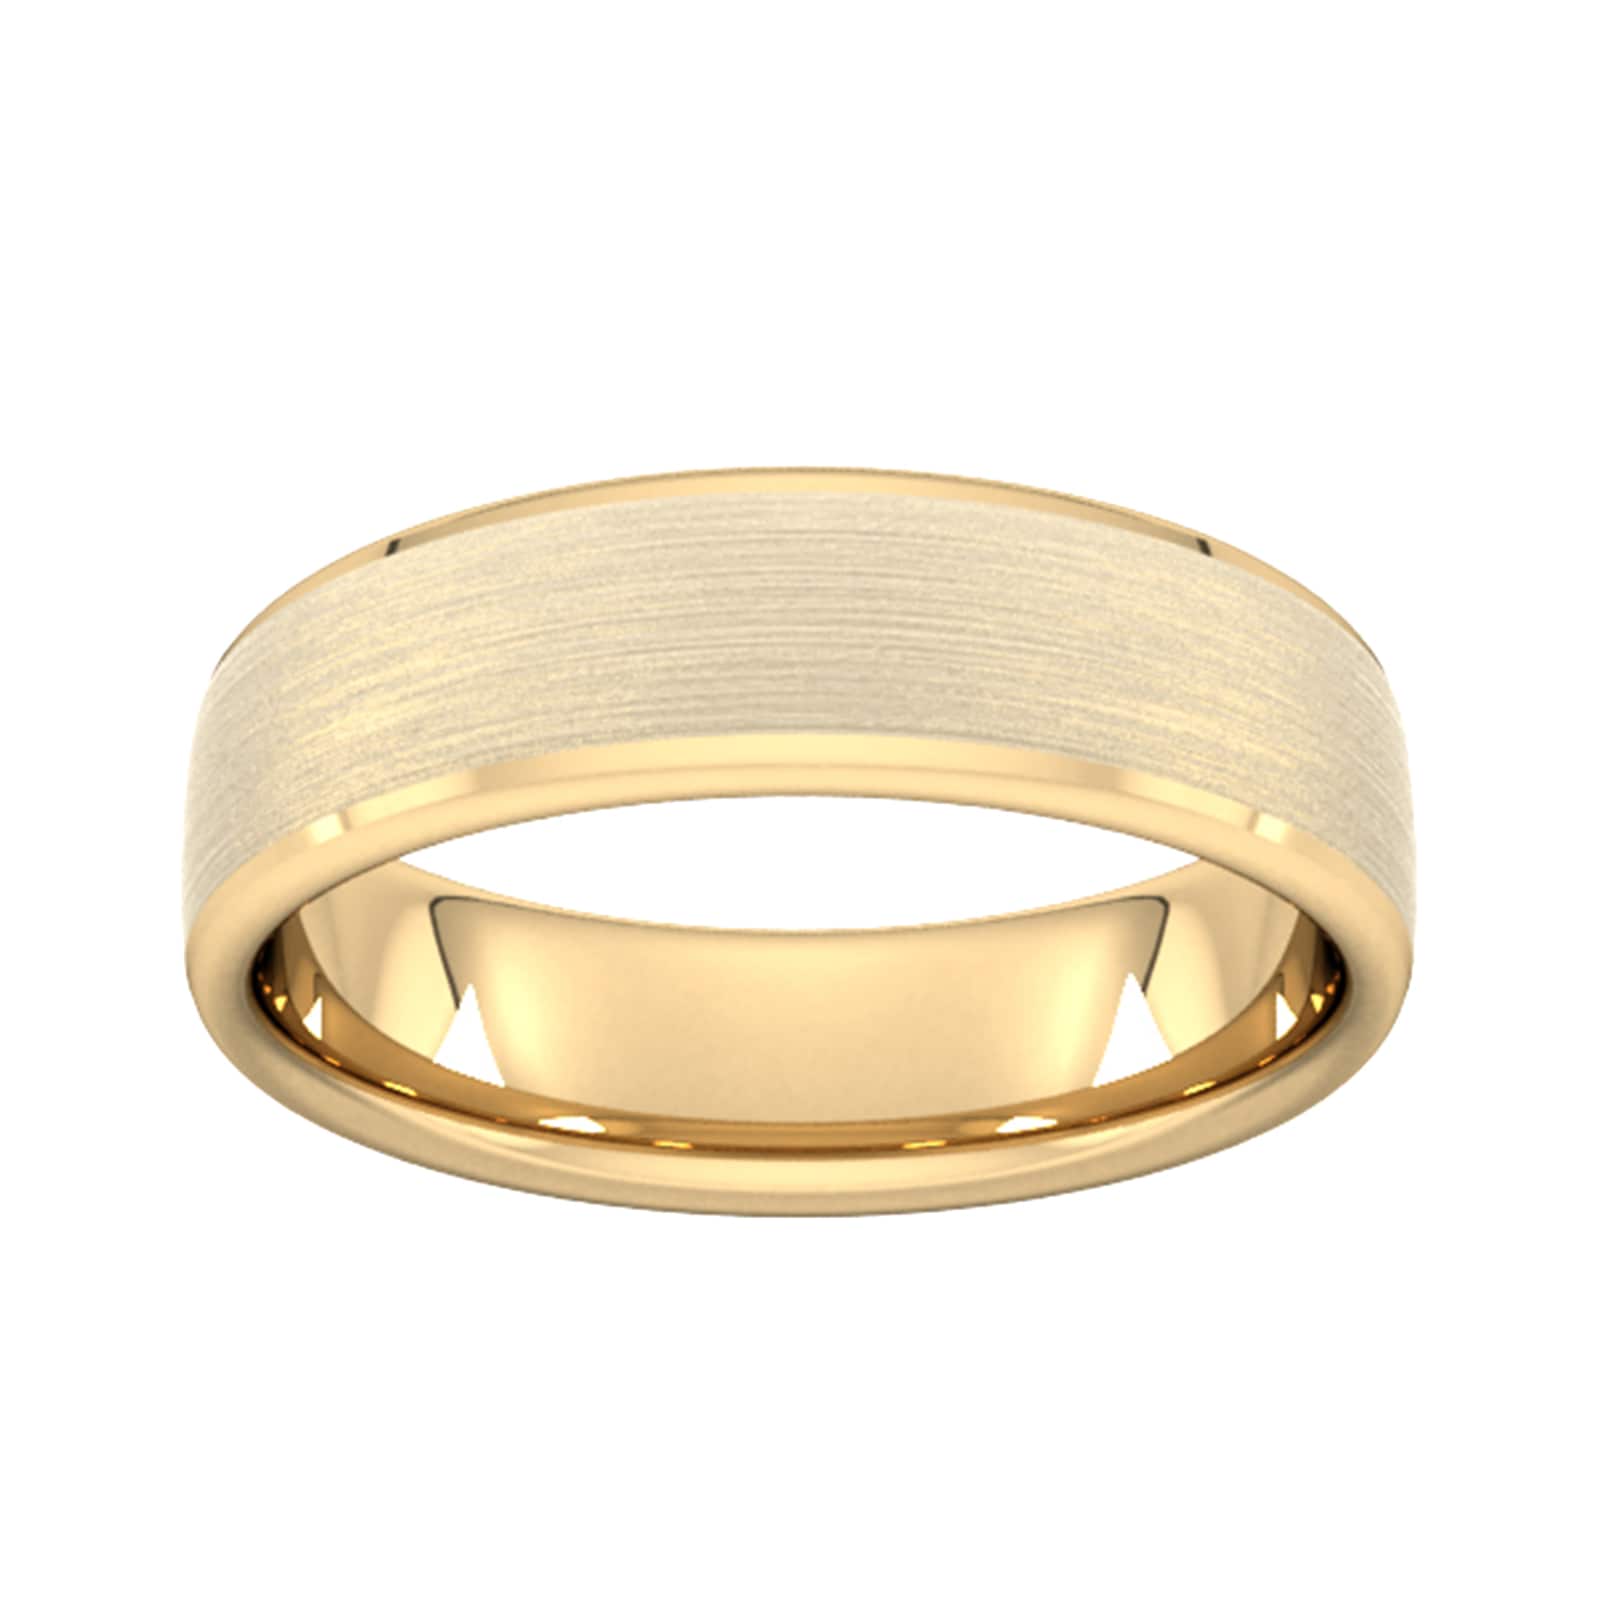 6mm Slight Court Extra Heavy Polished Chamfered Edges With Matt Centre Wedding Ring In 18 Carat Yellow Gold - Ring Size N